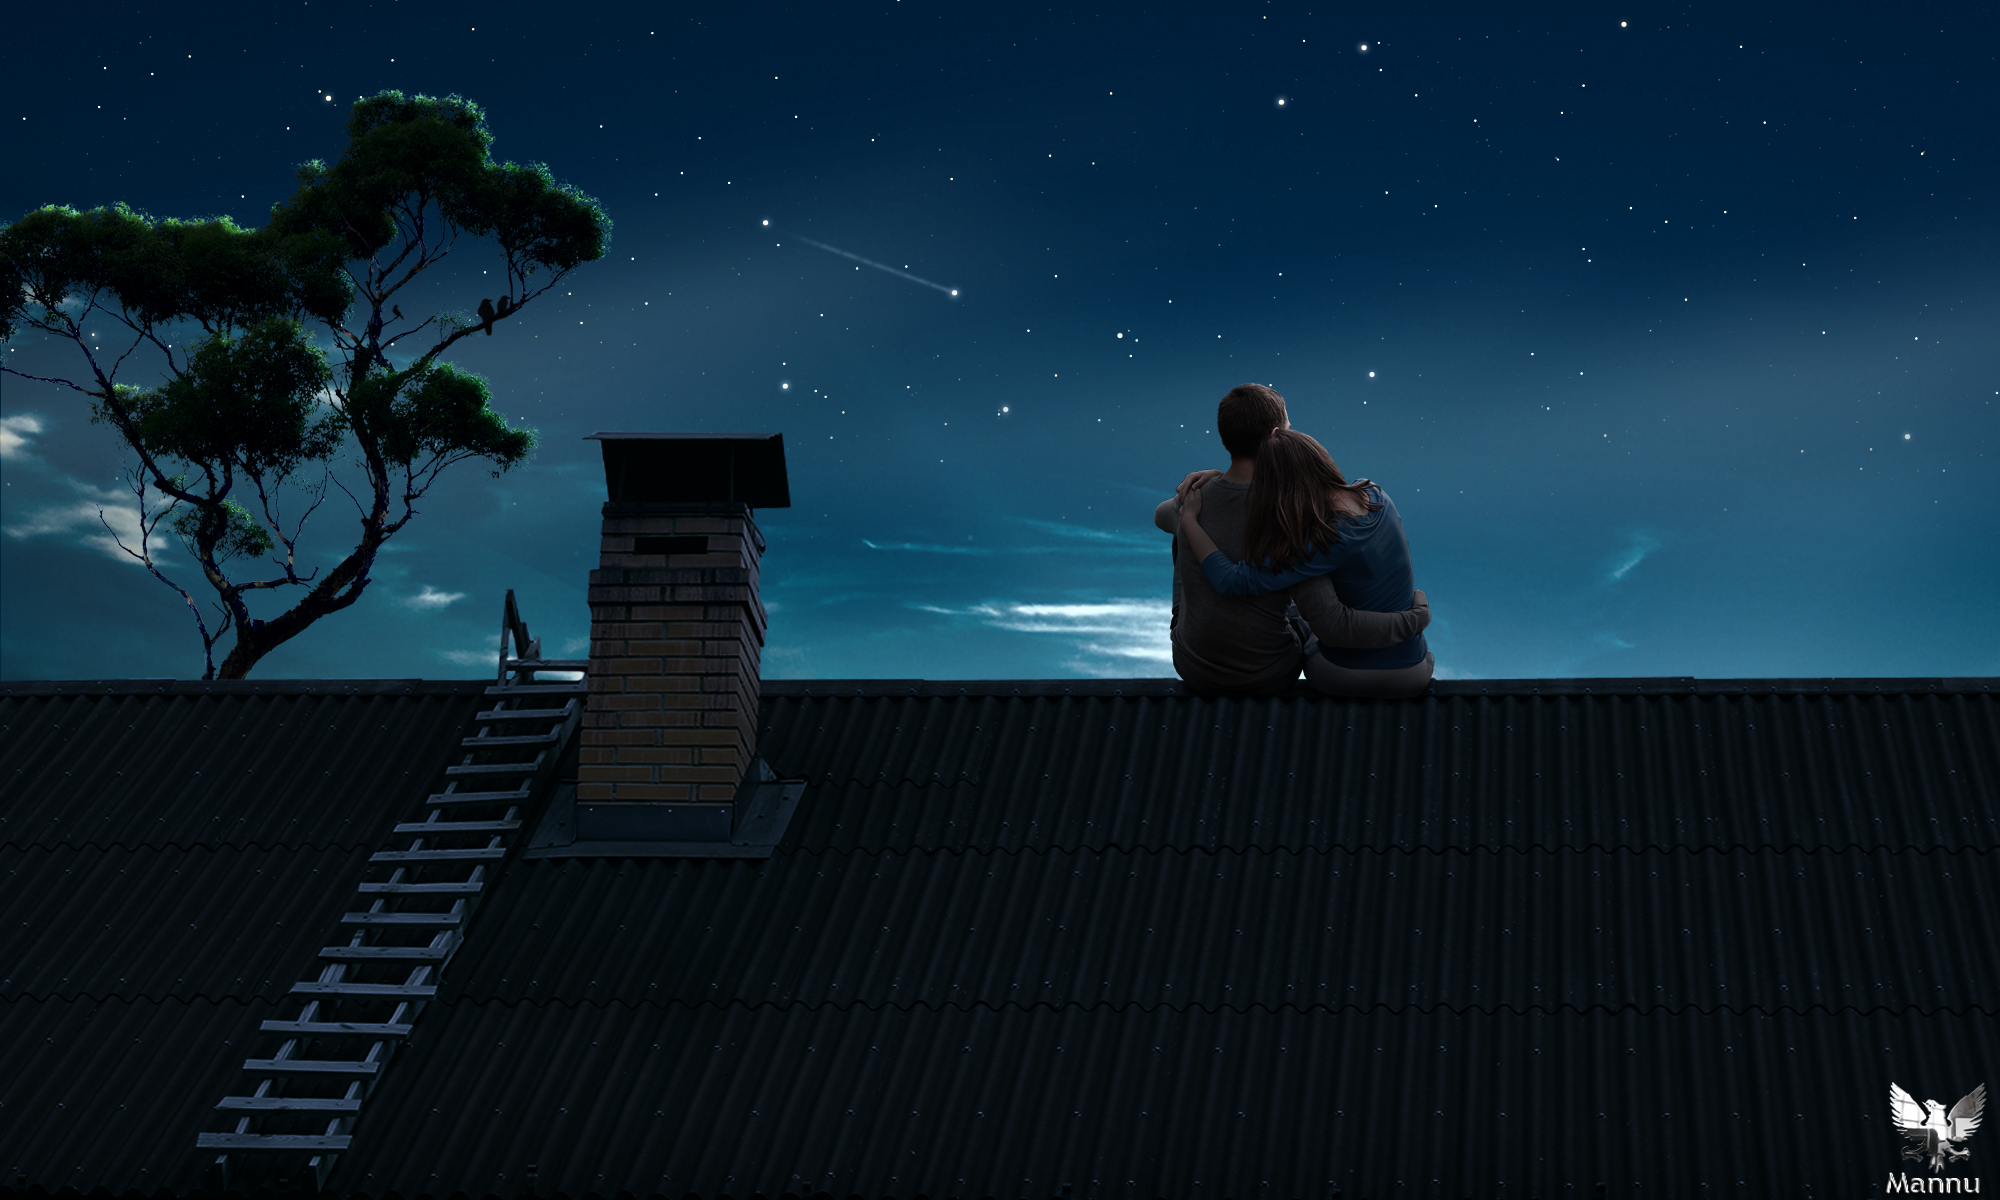 Wallpaper, drawing, night, sky, moonlight, couple, midnight, darkness, image, screenshot, computer wallpaper, atmosphere of earth 2000x1200